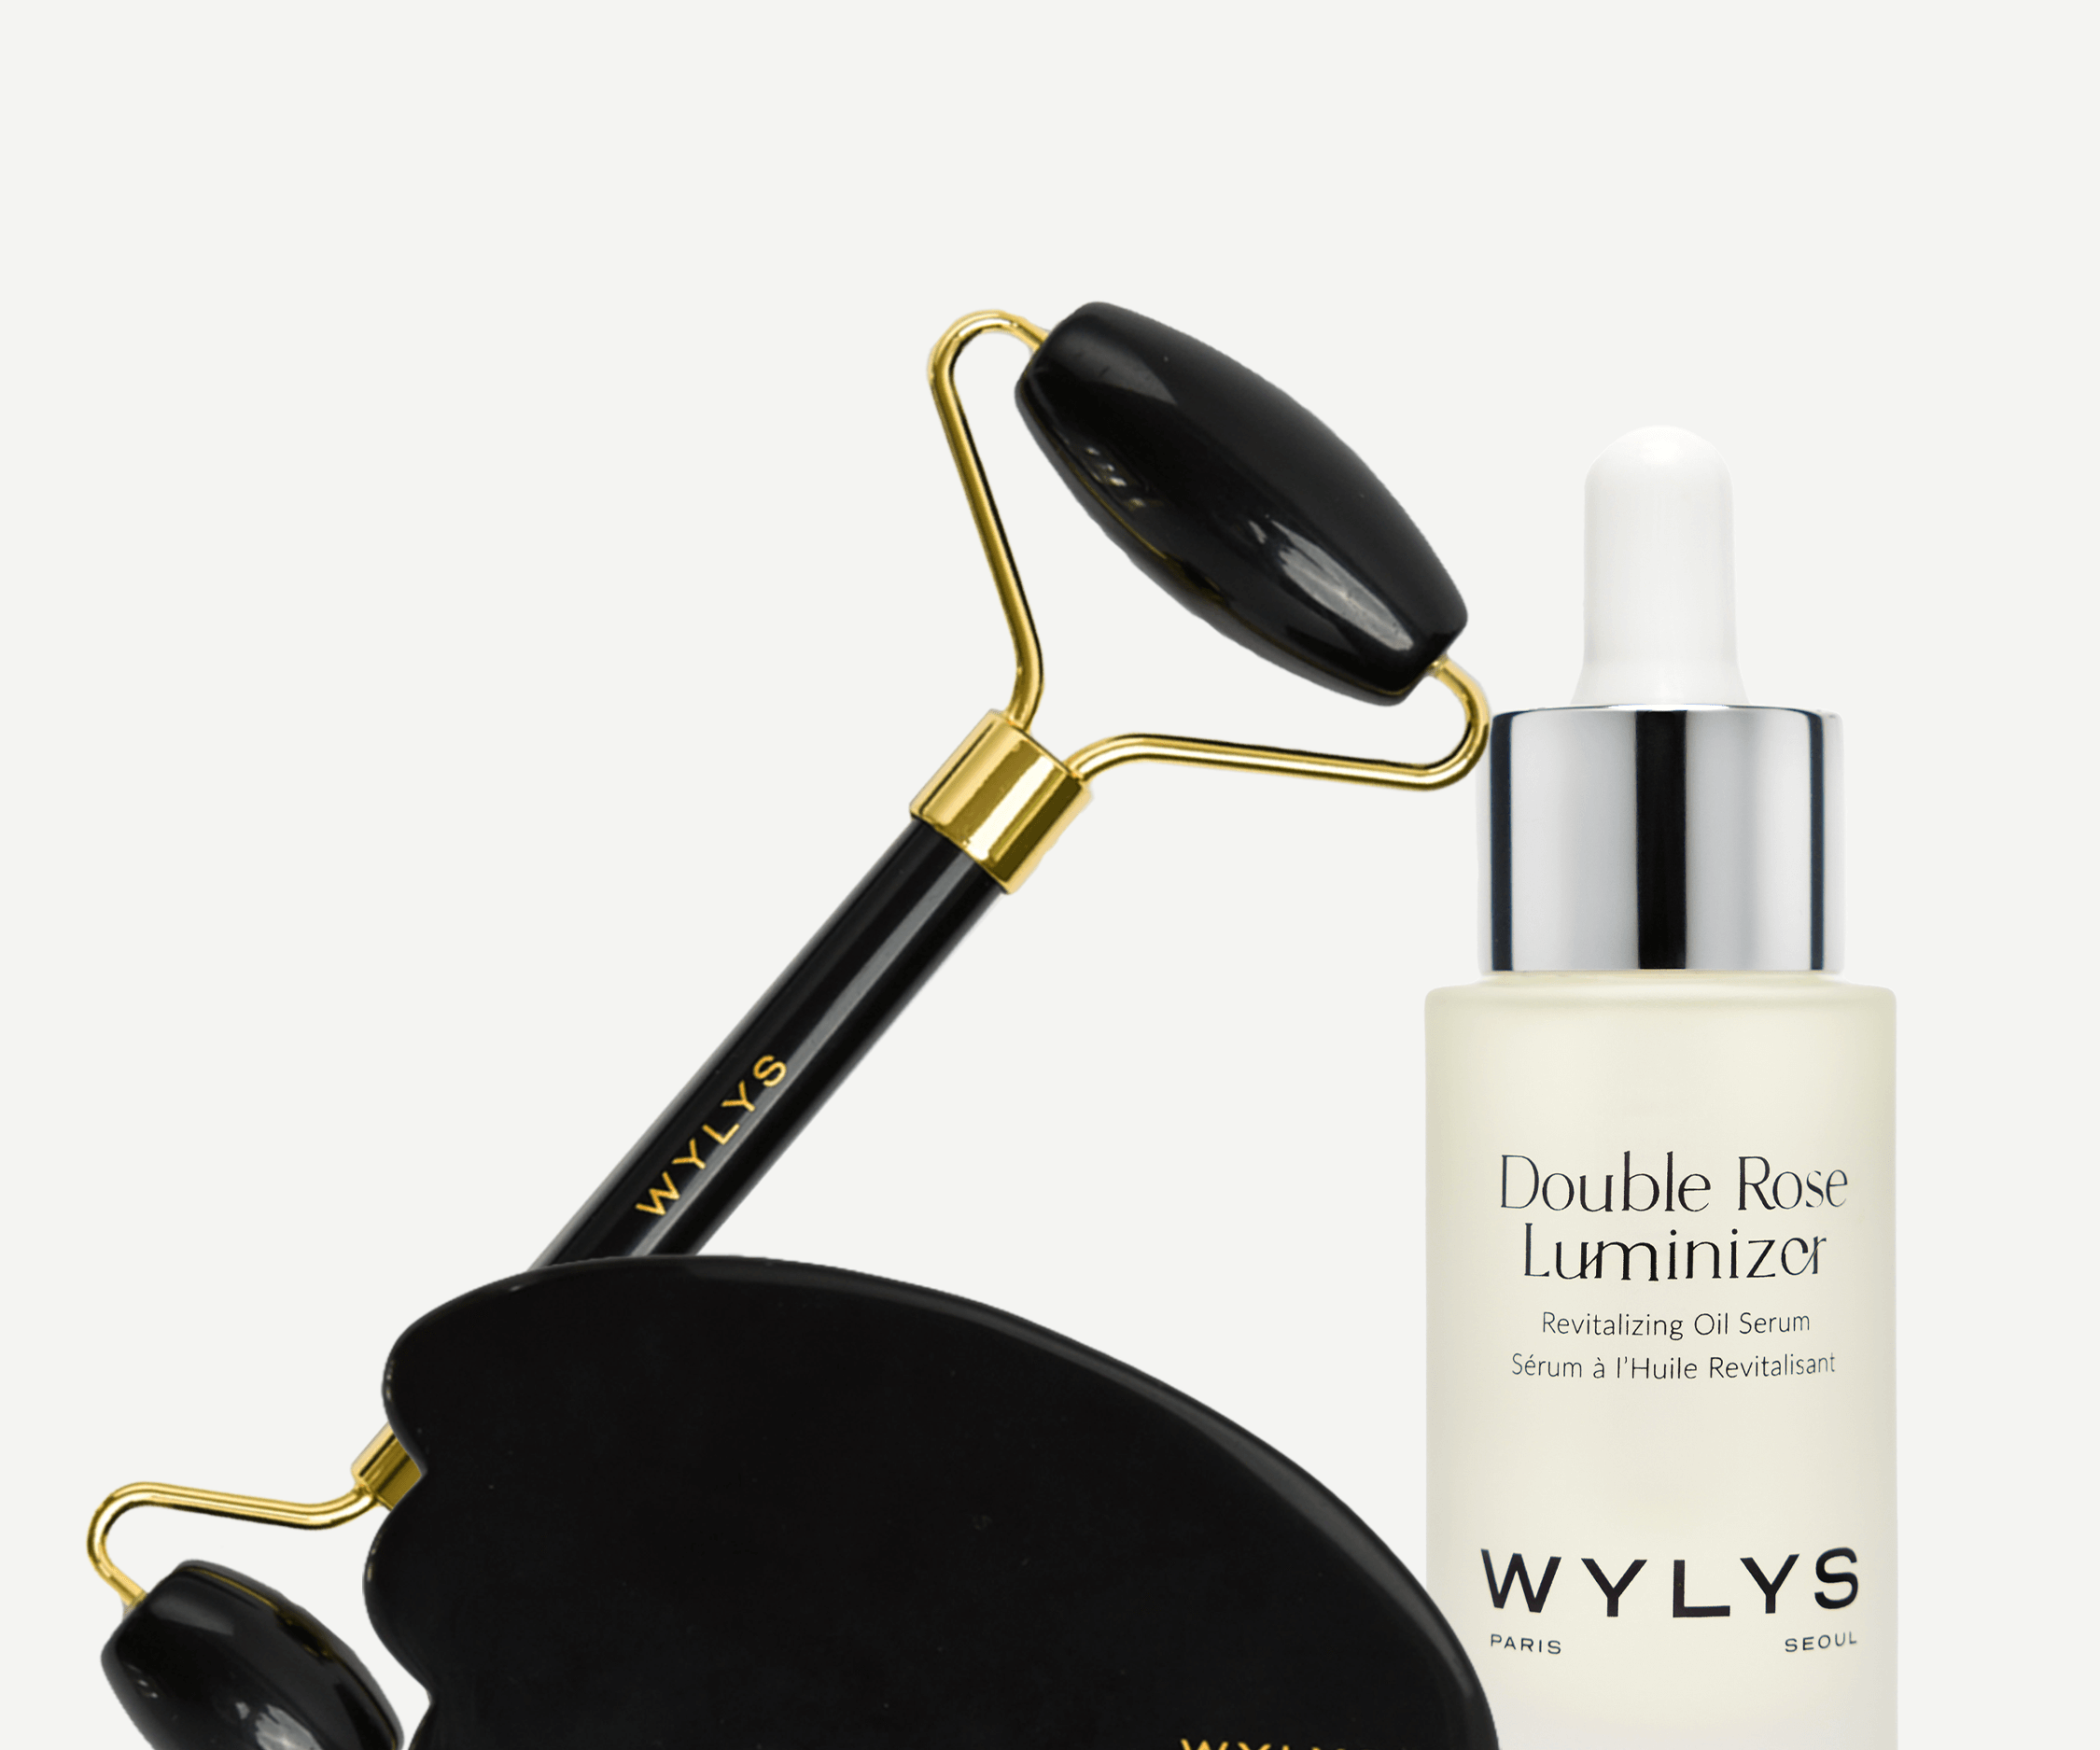 WYLYS Gua Sha Face Roller Kit and Double Rose Luminizer